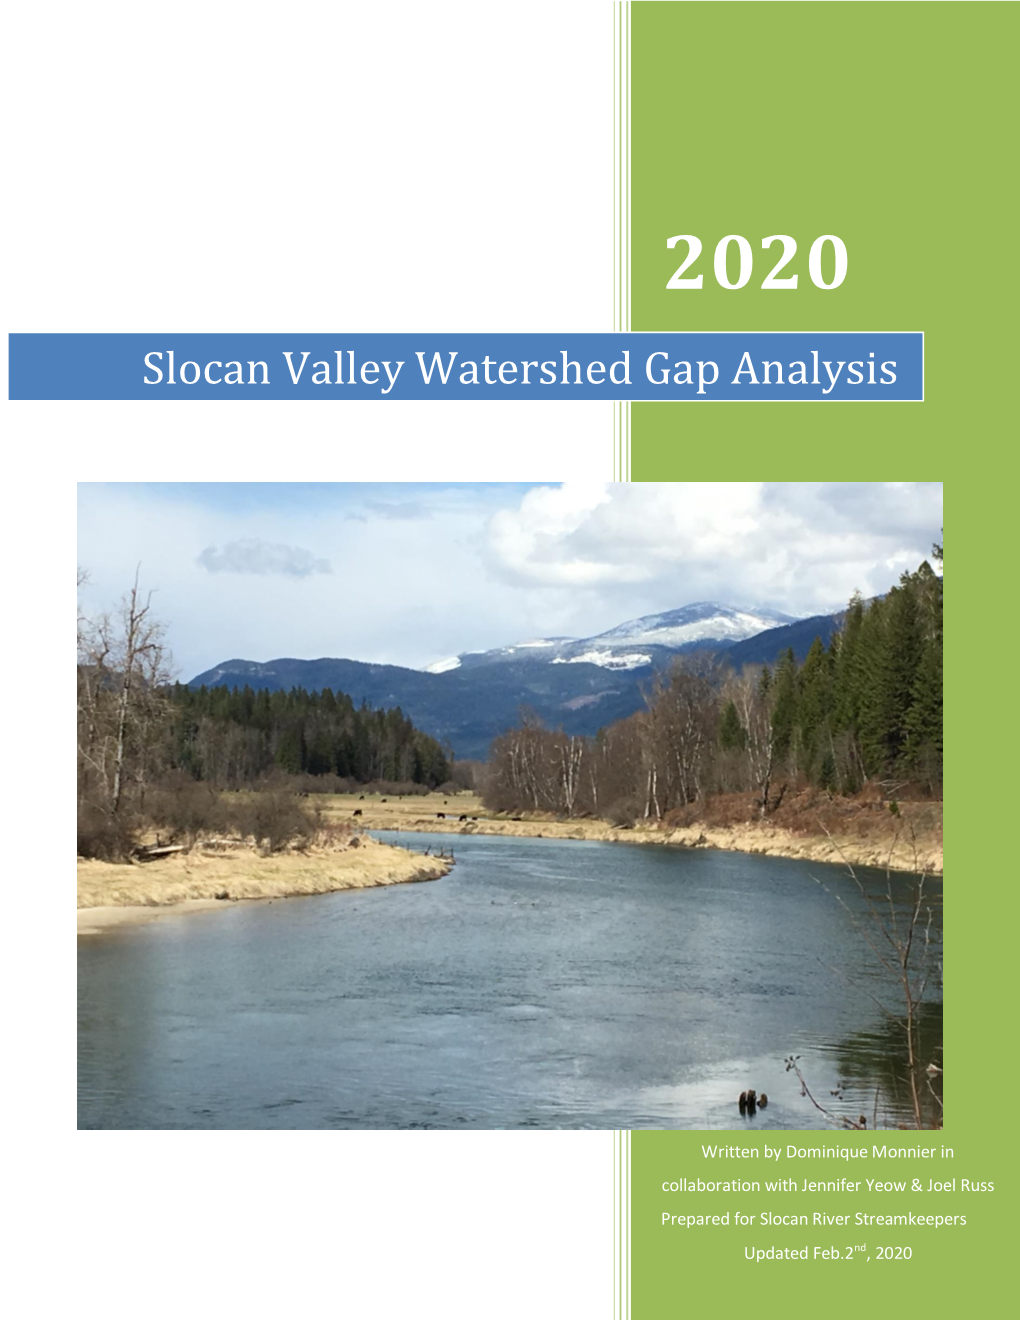 Slocan Valley Watershed Gap Analysis